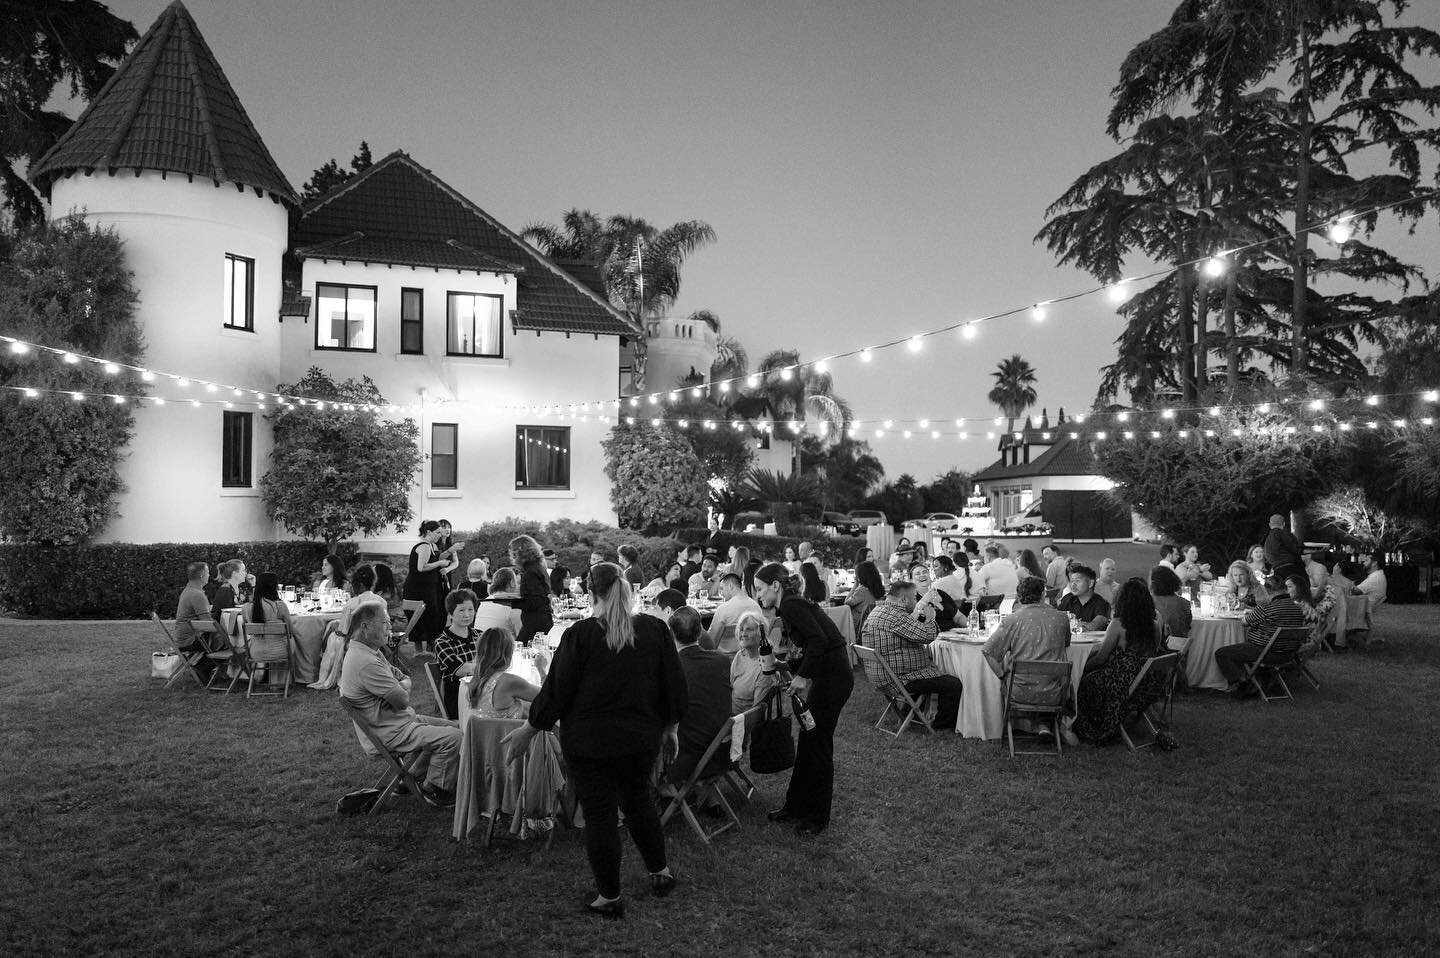 First time dining on our gorgeous lawn at the castle!  Thanks to all who made Supper Social a delicious success 🥂 
&hellip;
Team Chef Cordelia/Wrensmoor:
@chef_tiff @reagancanaday @jaceymargolis @sashalee5 @egustavo 
📸 @rmsphotonut 
&hellip;
VENUE 